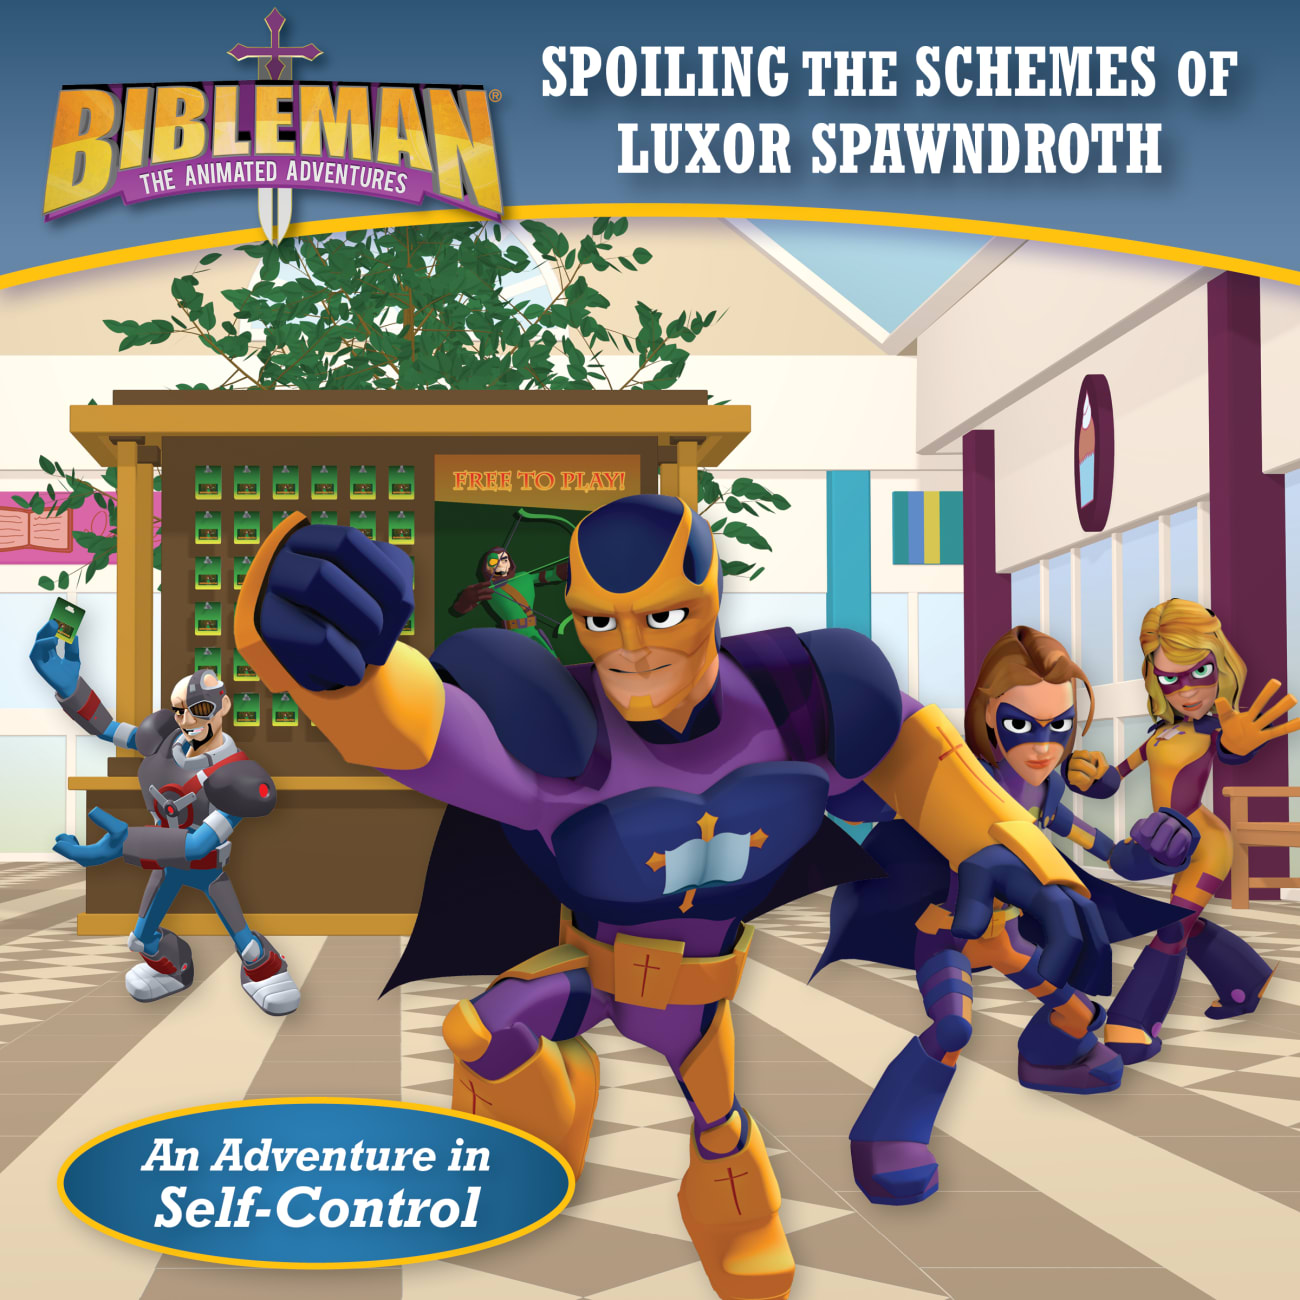 Bibleman: Spoiling the Schemes of Luxor Spawndroth Paperback